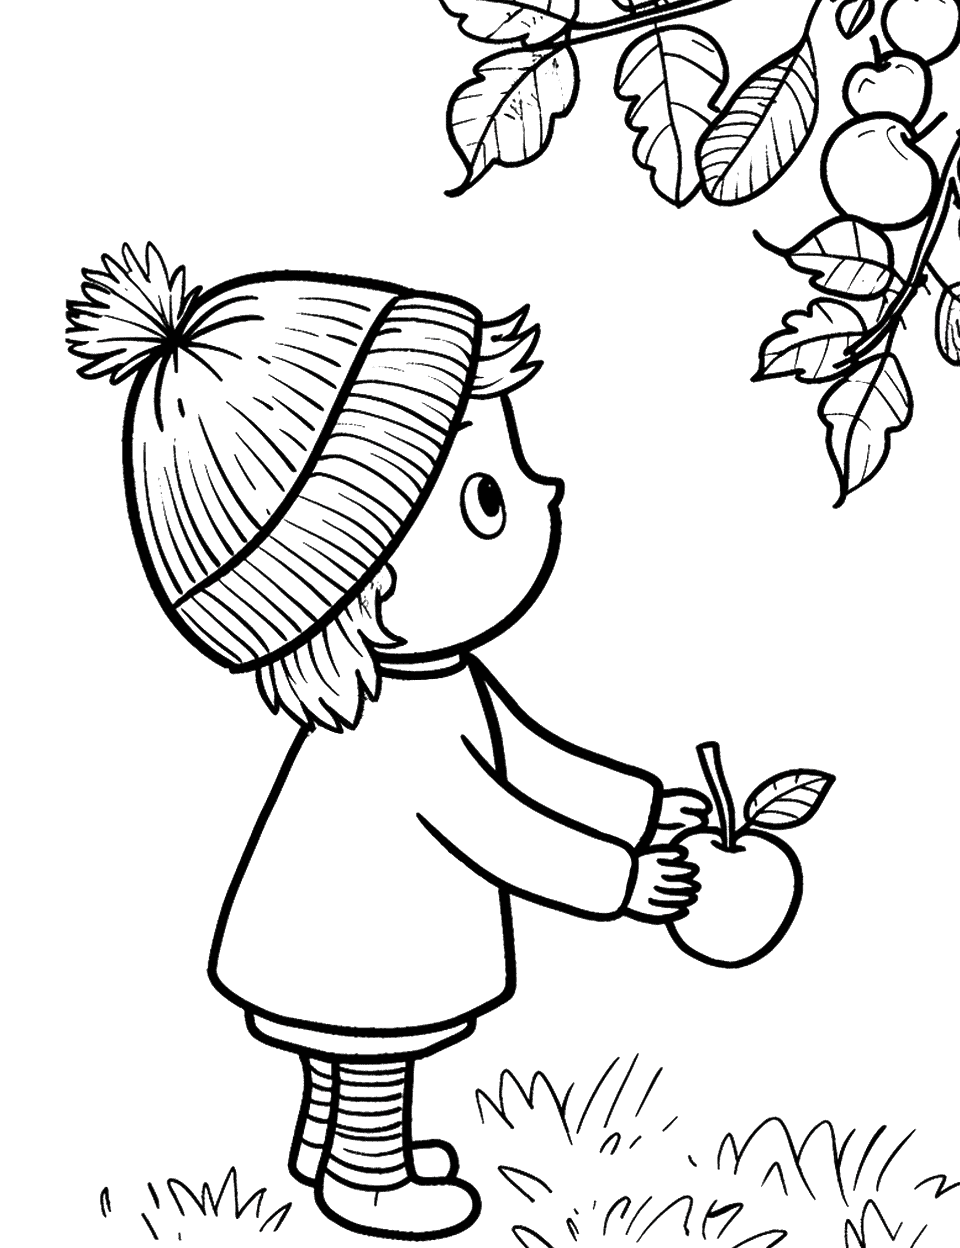 Autumn Harvest Festival Toddler Coloring Page - A child picking apples from a low branch in an orchard.